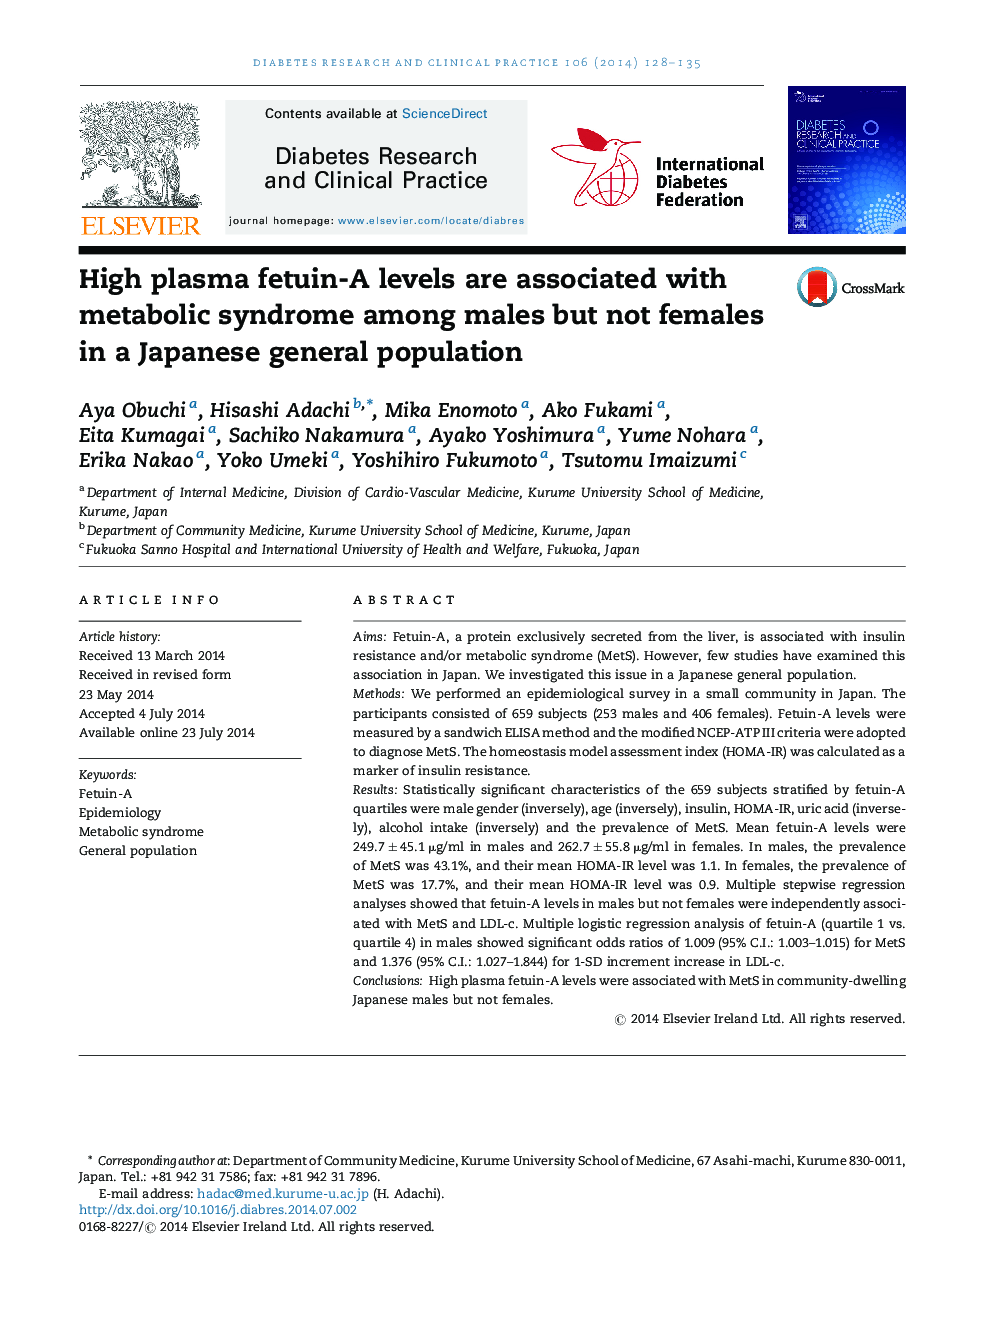 High plasma fetuin-A levels are associated with metabolic syndrome among males but not females in a Japanese general population